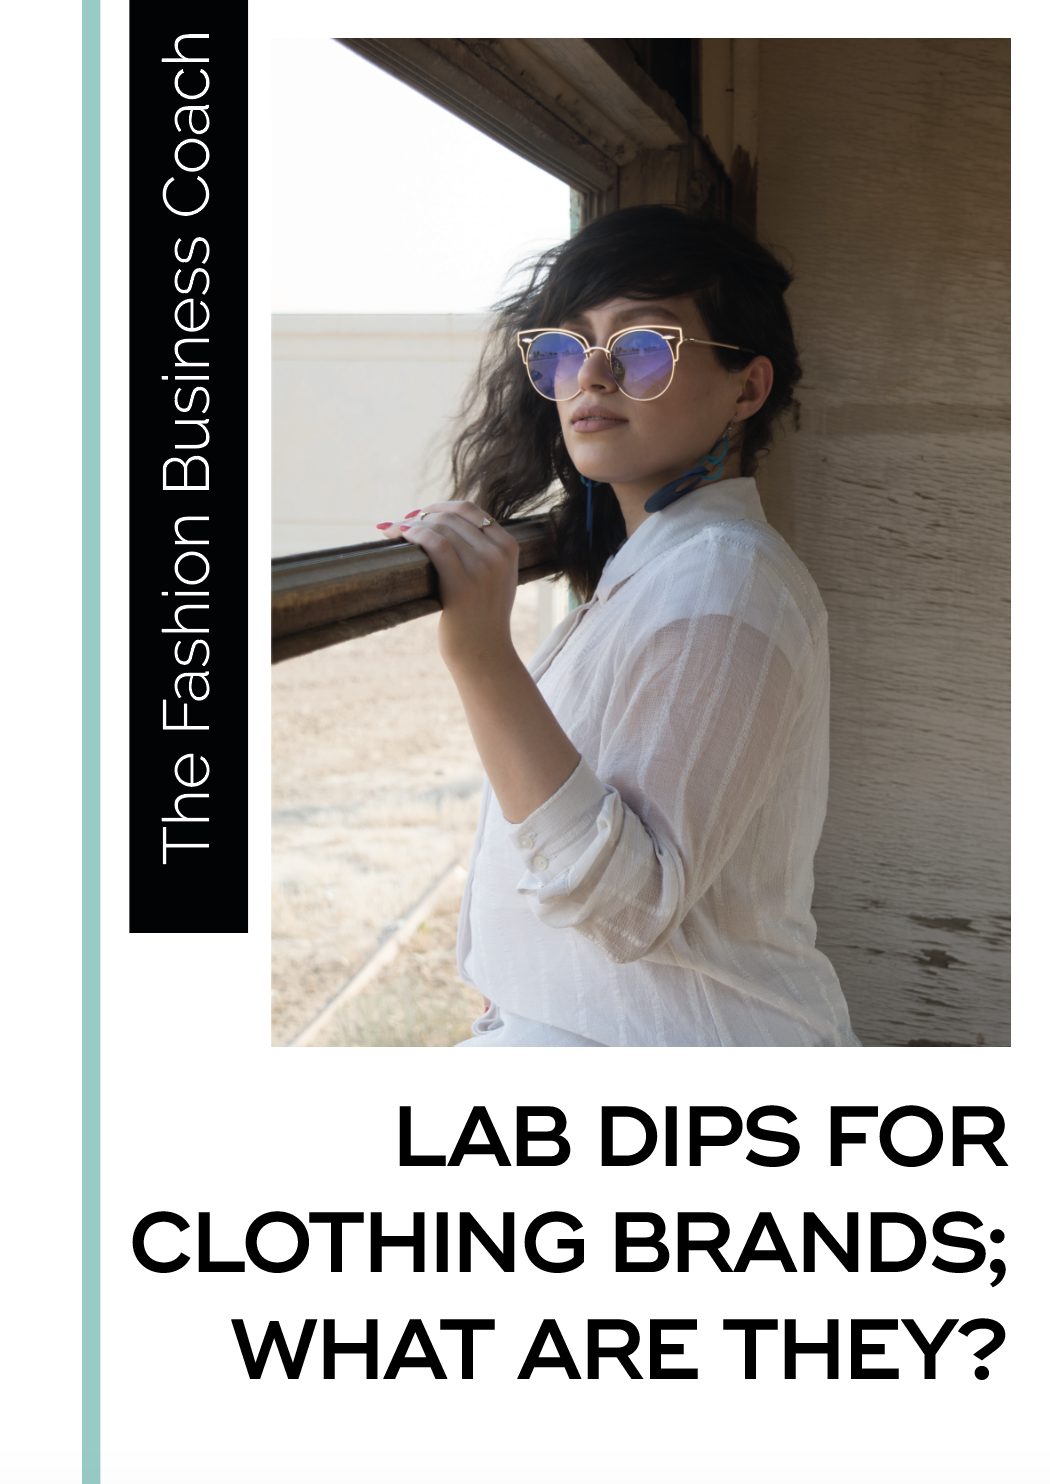 Lab Dips for Clothing Brands What are They? 1.png